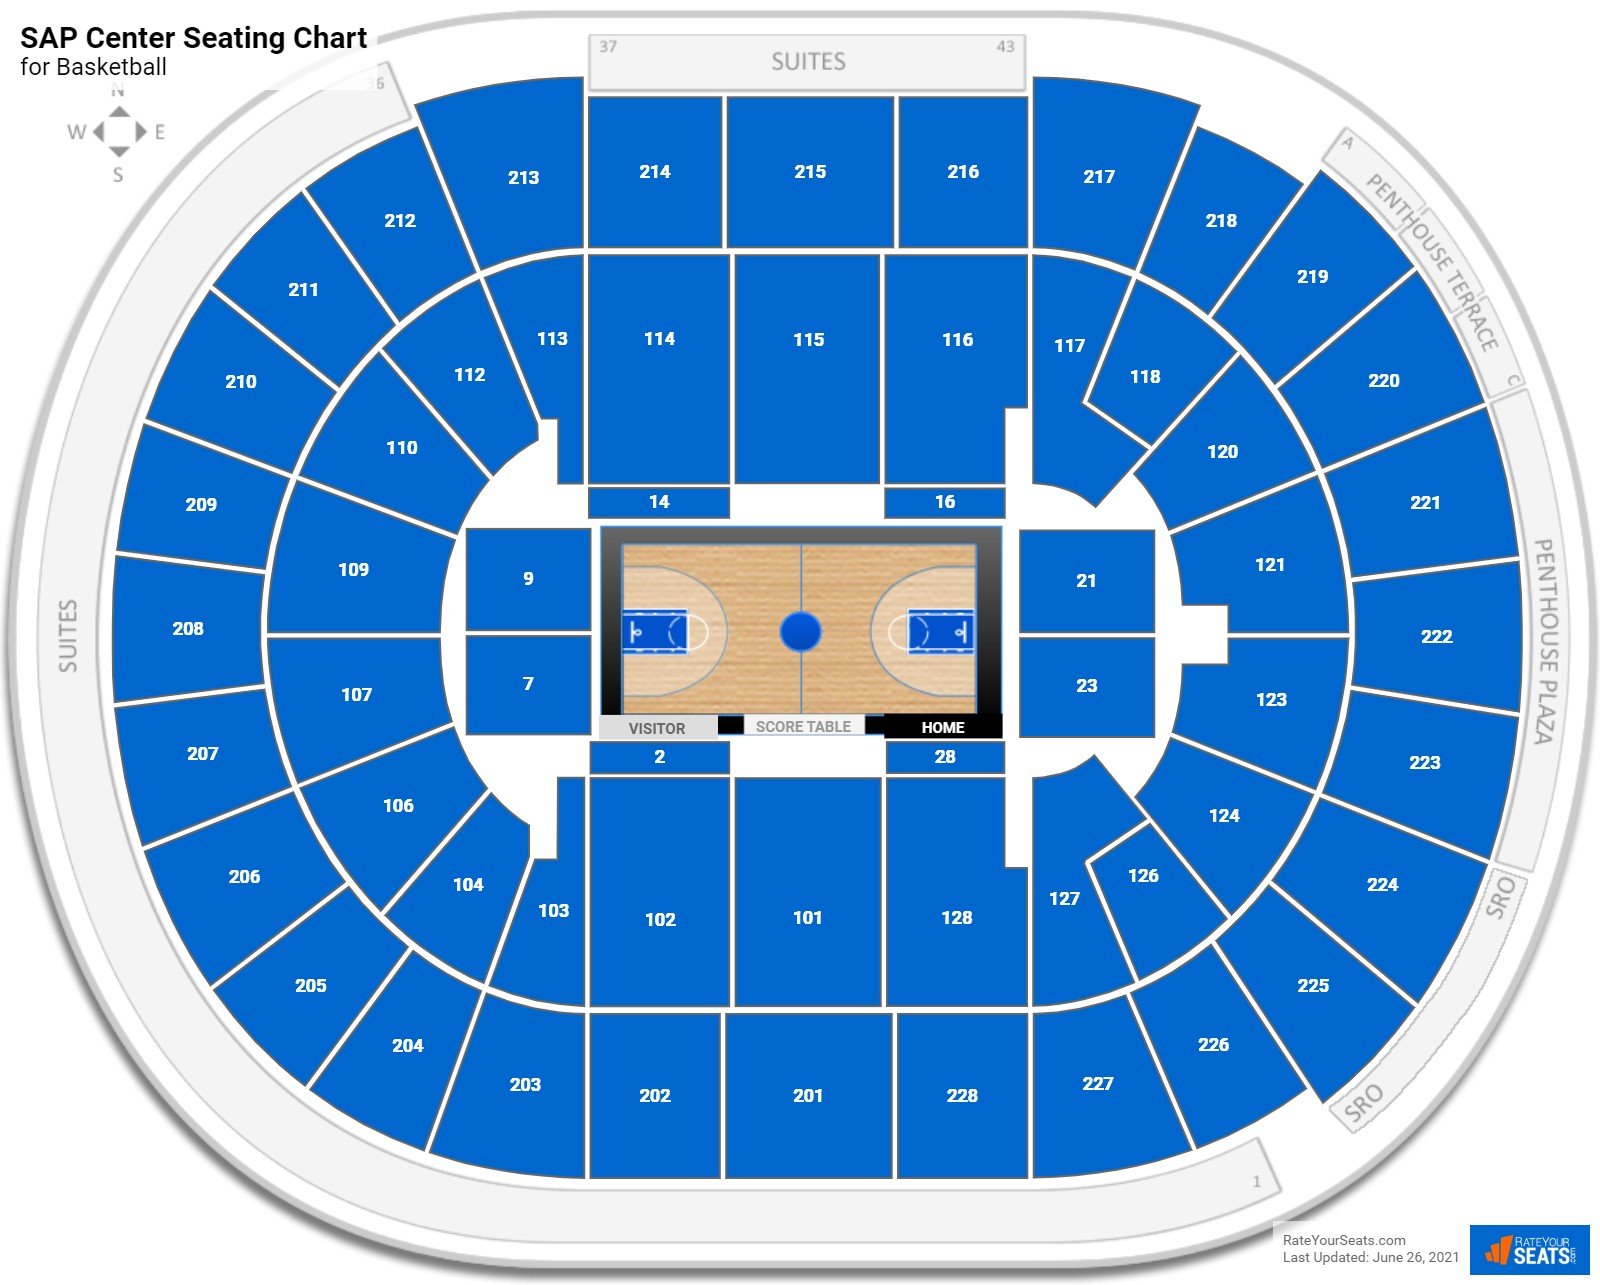 Section 124 at SAP Center for Basketball - RateYourSeats.com